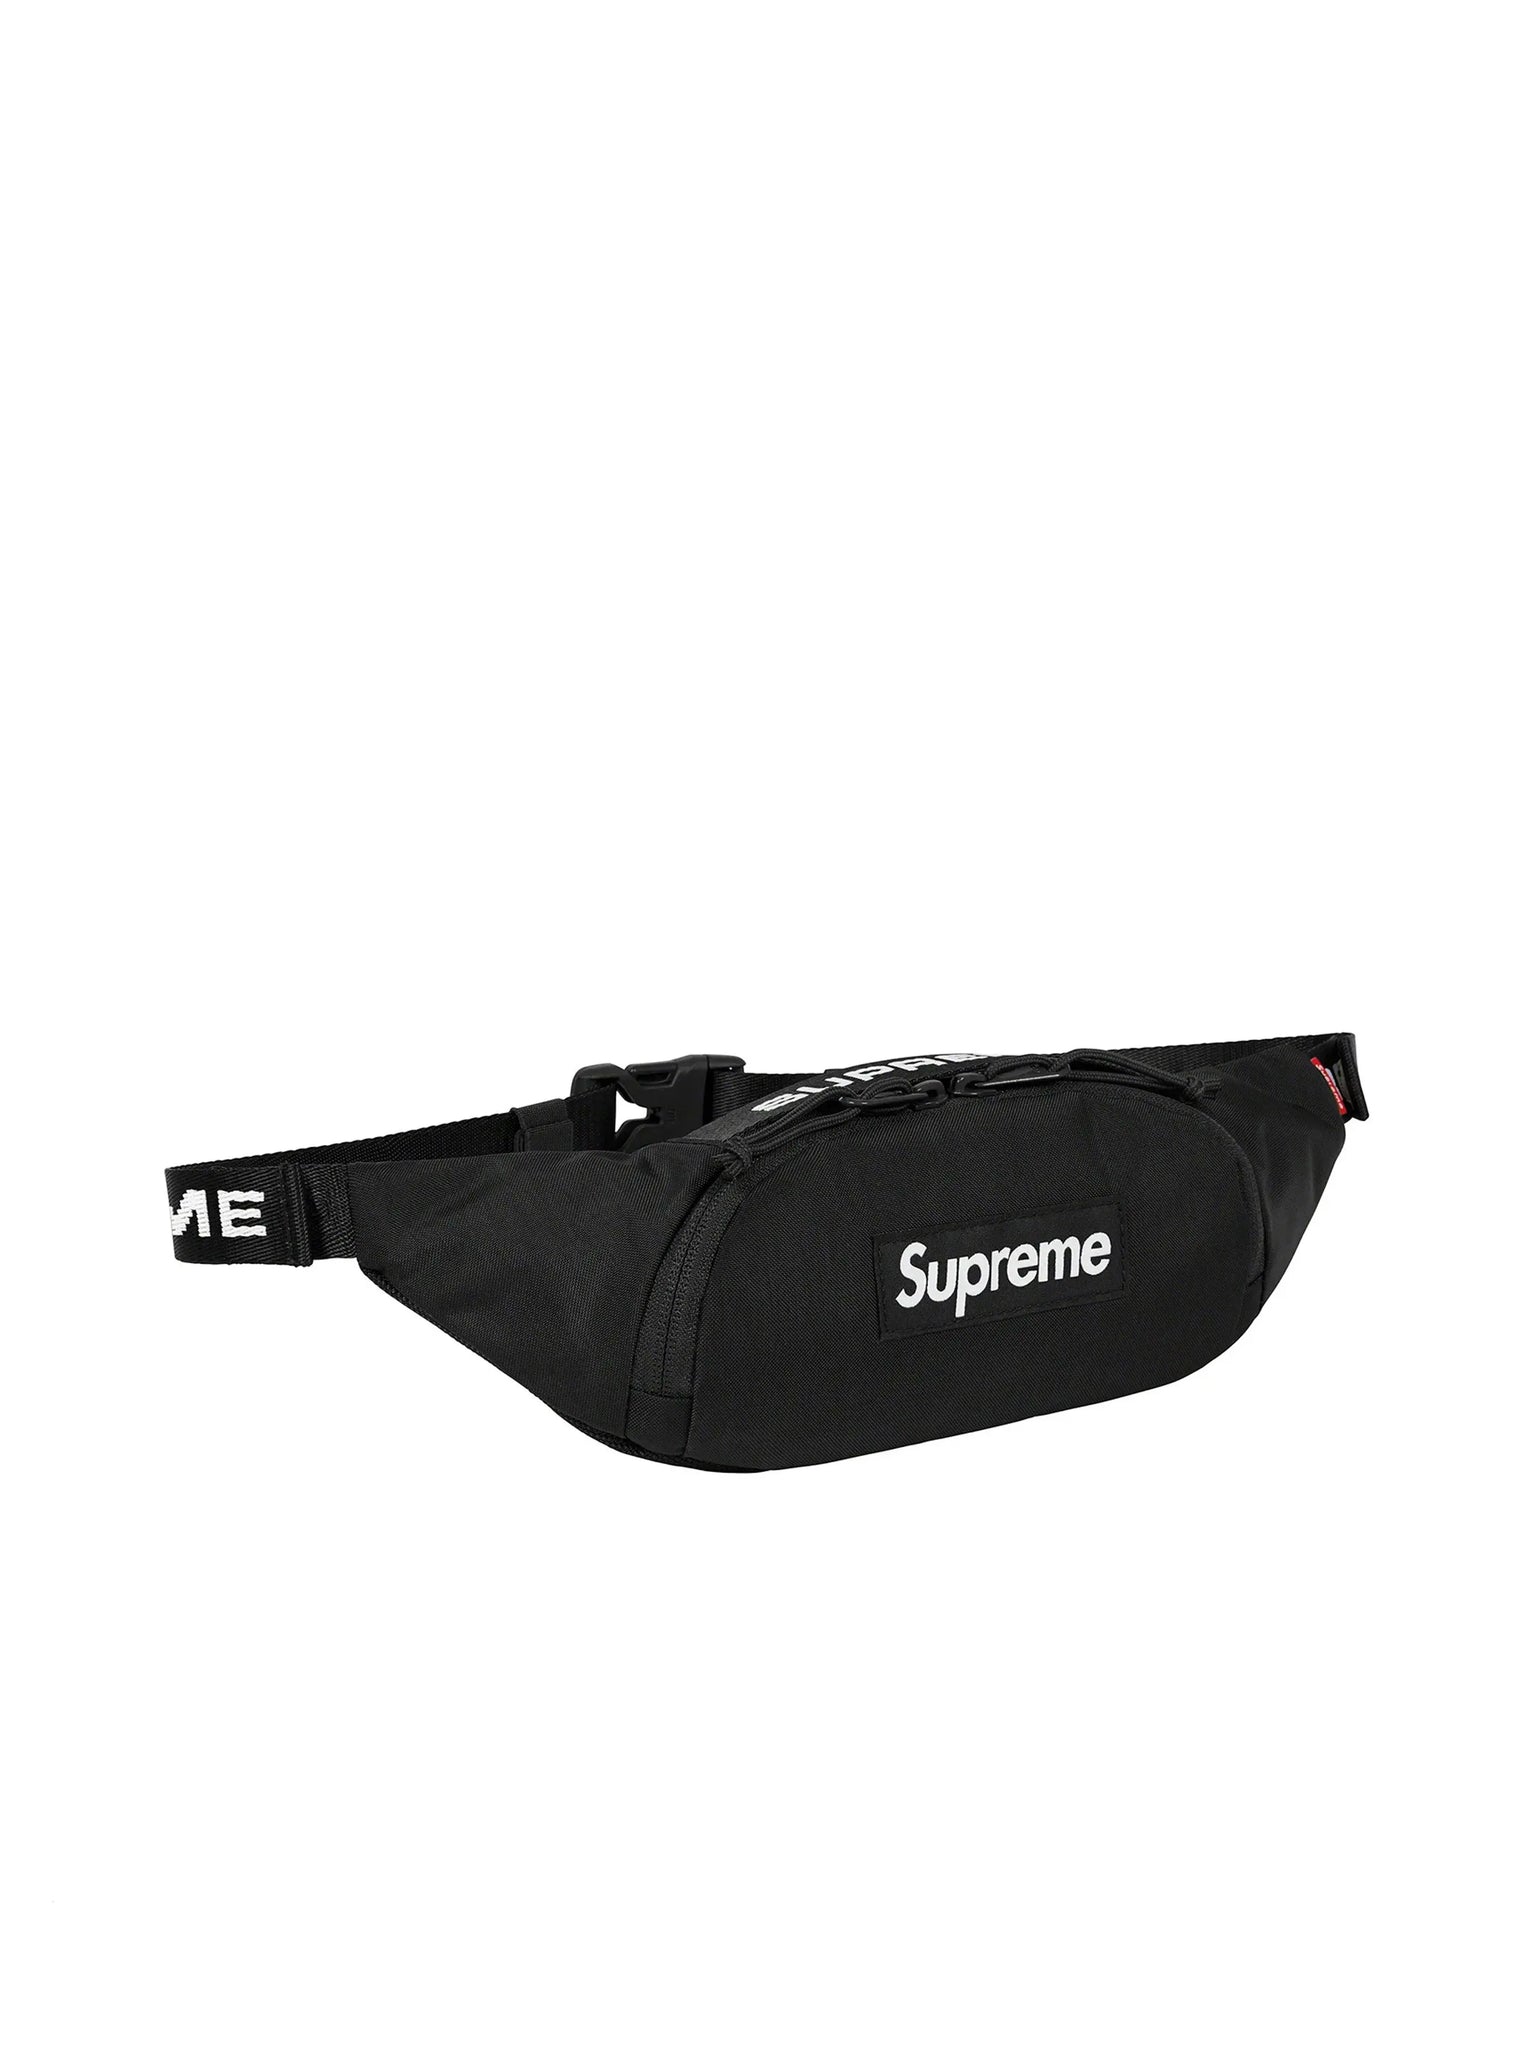 Supreme Small Waist Bag (FW22) Black in Auckland, New Zealand - Shop name